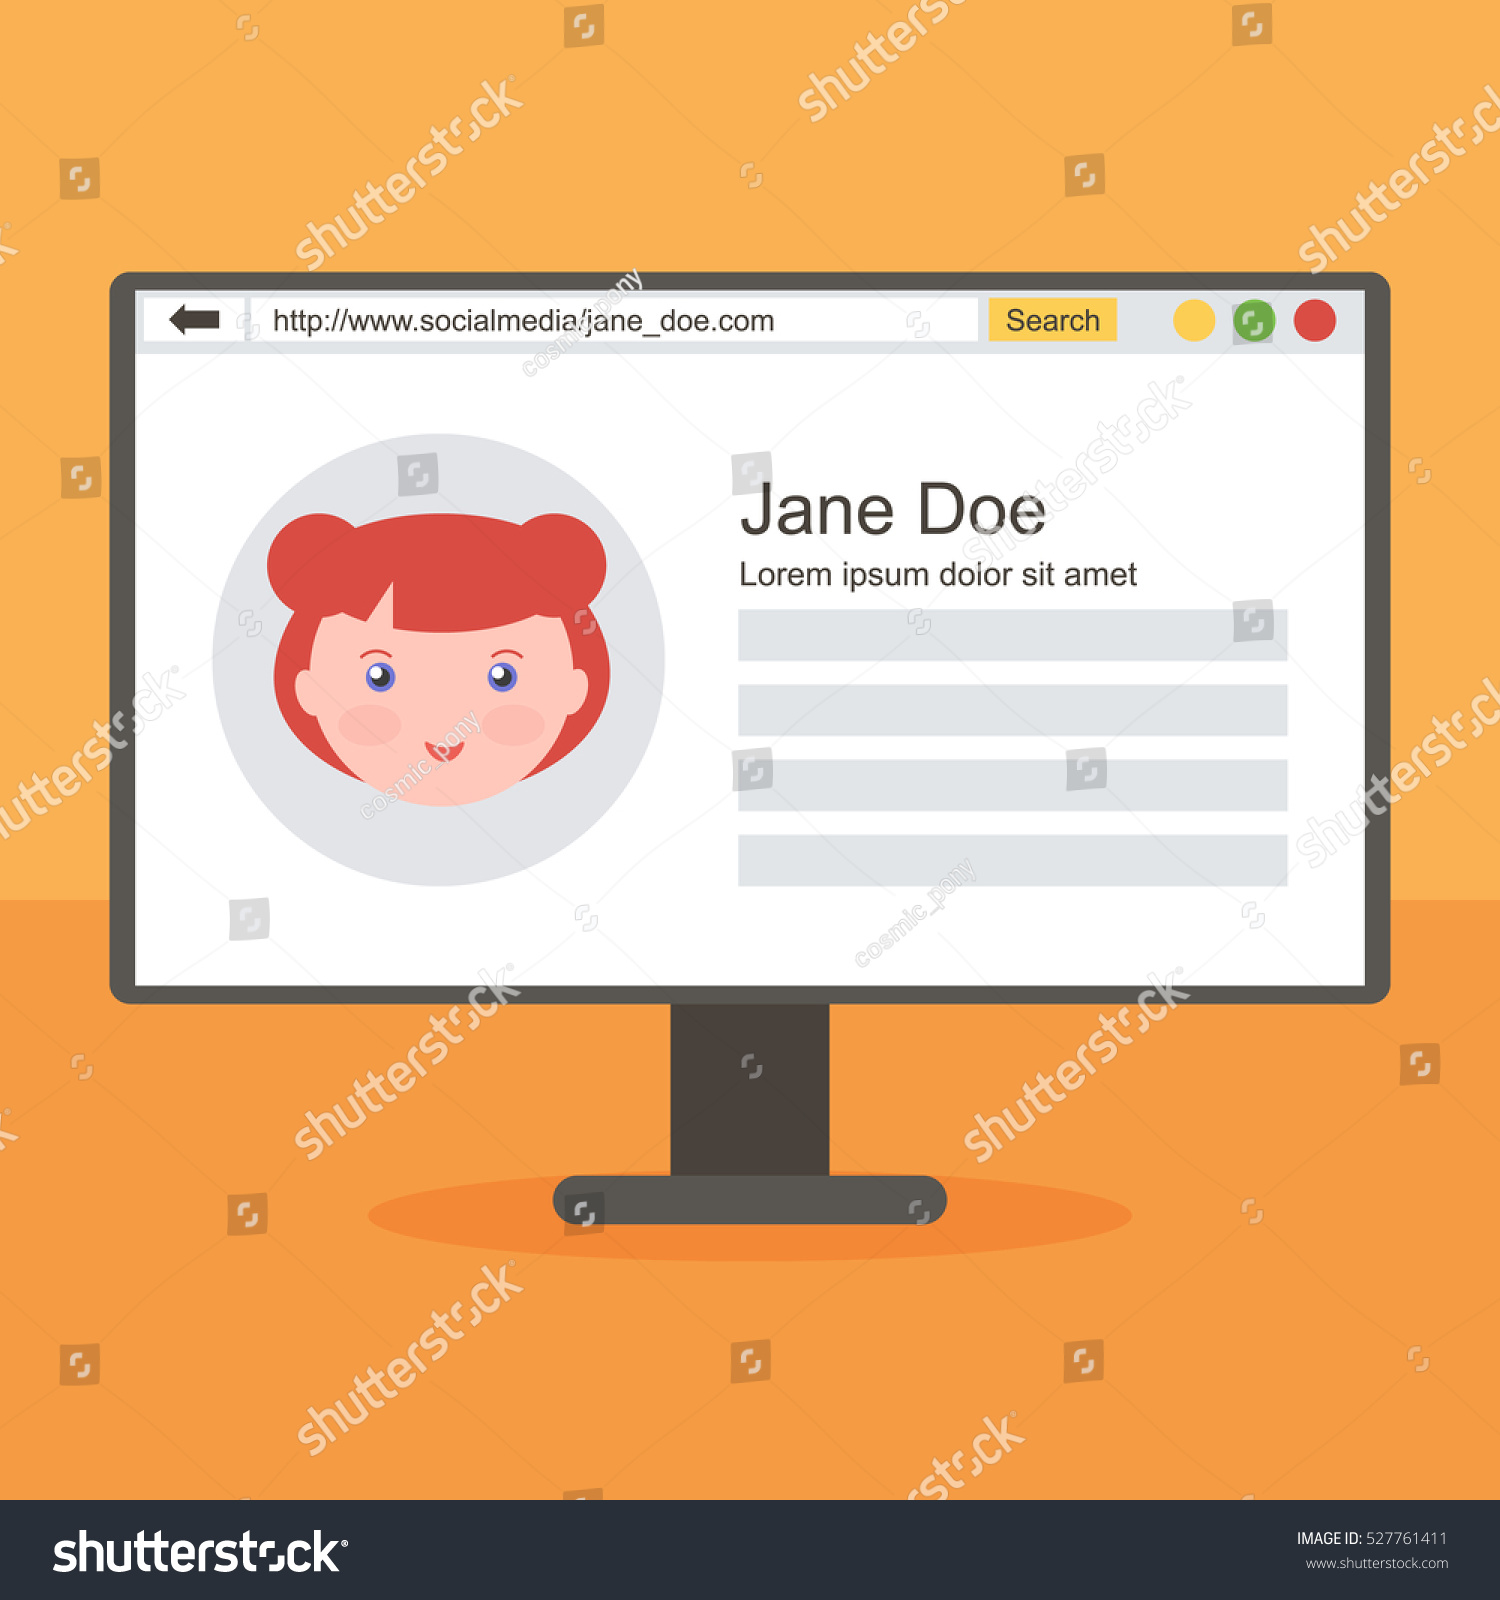 Social Media Profile Page Template from image.shutterstock.com